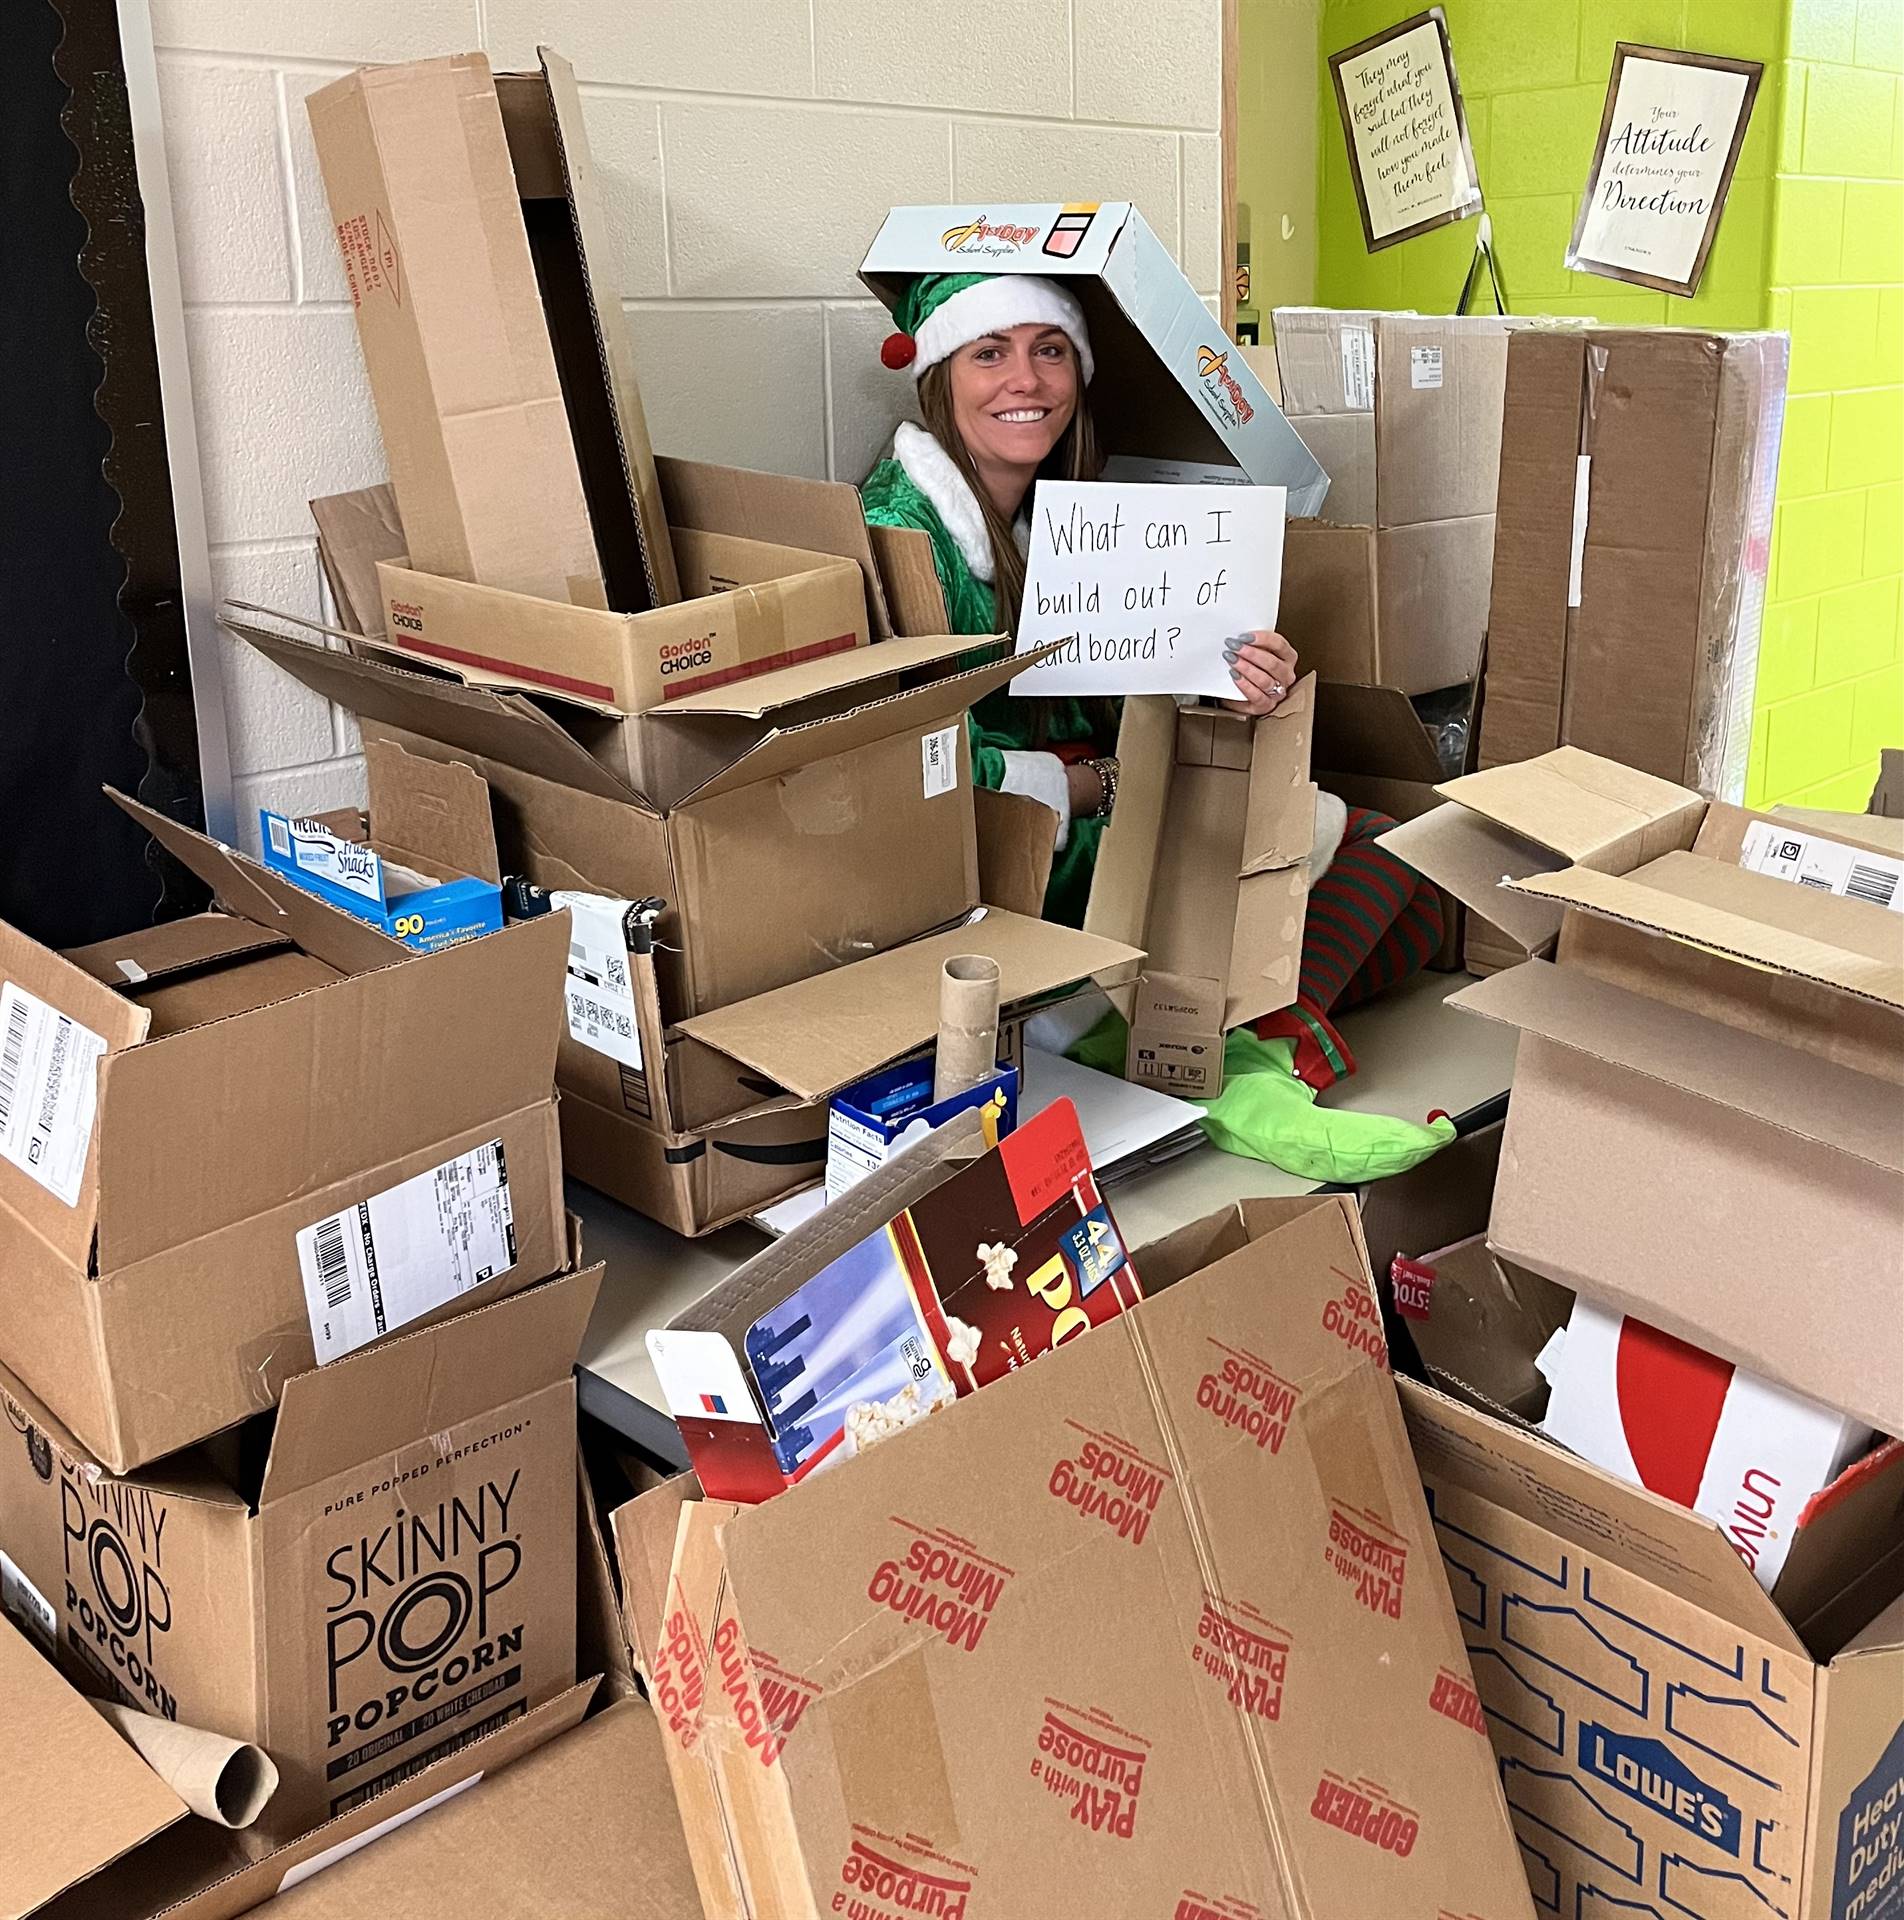 Principal Crawford is dressed in a green elf outfit sitting in a pile of cardboard. She is holding a